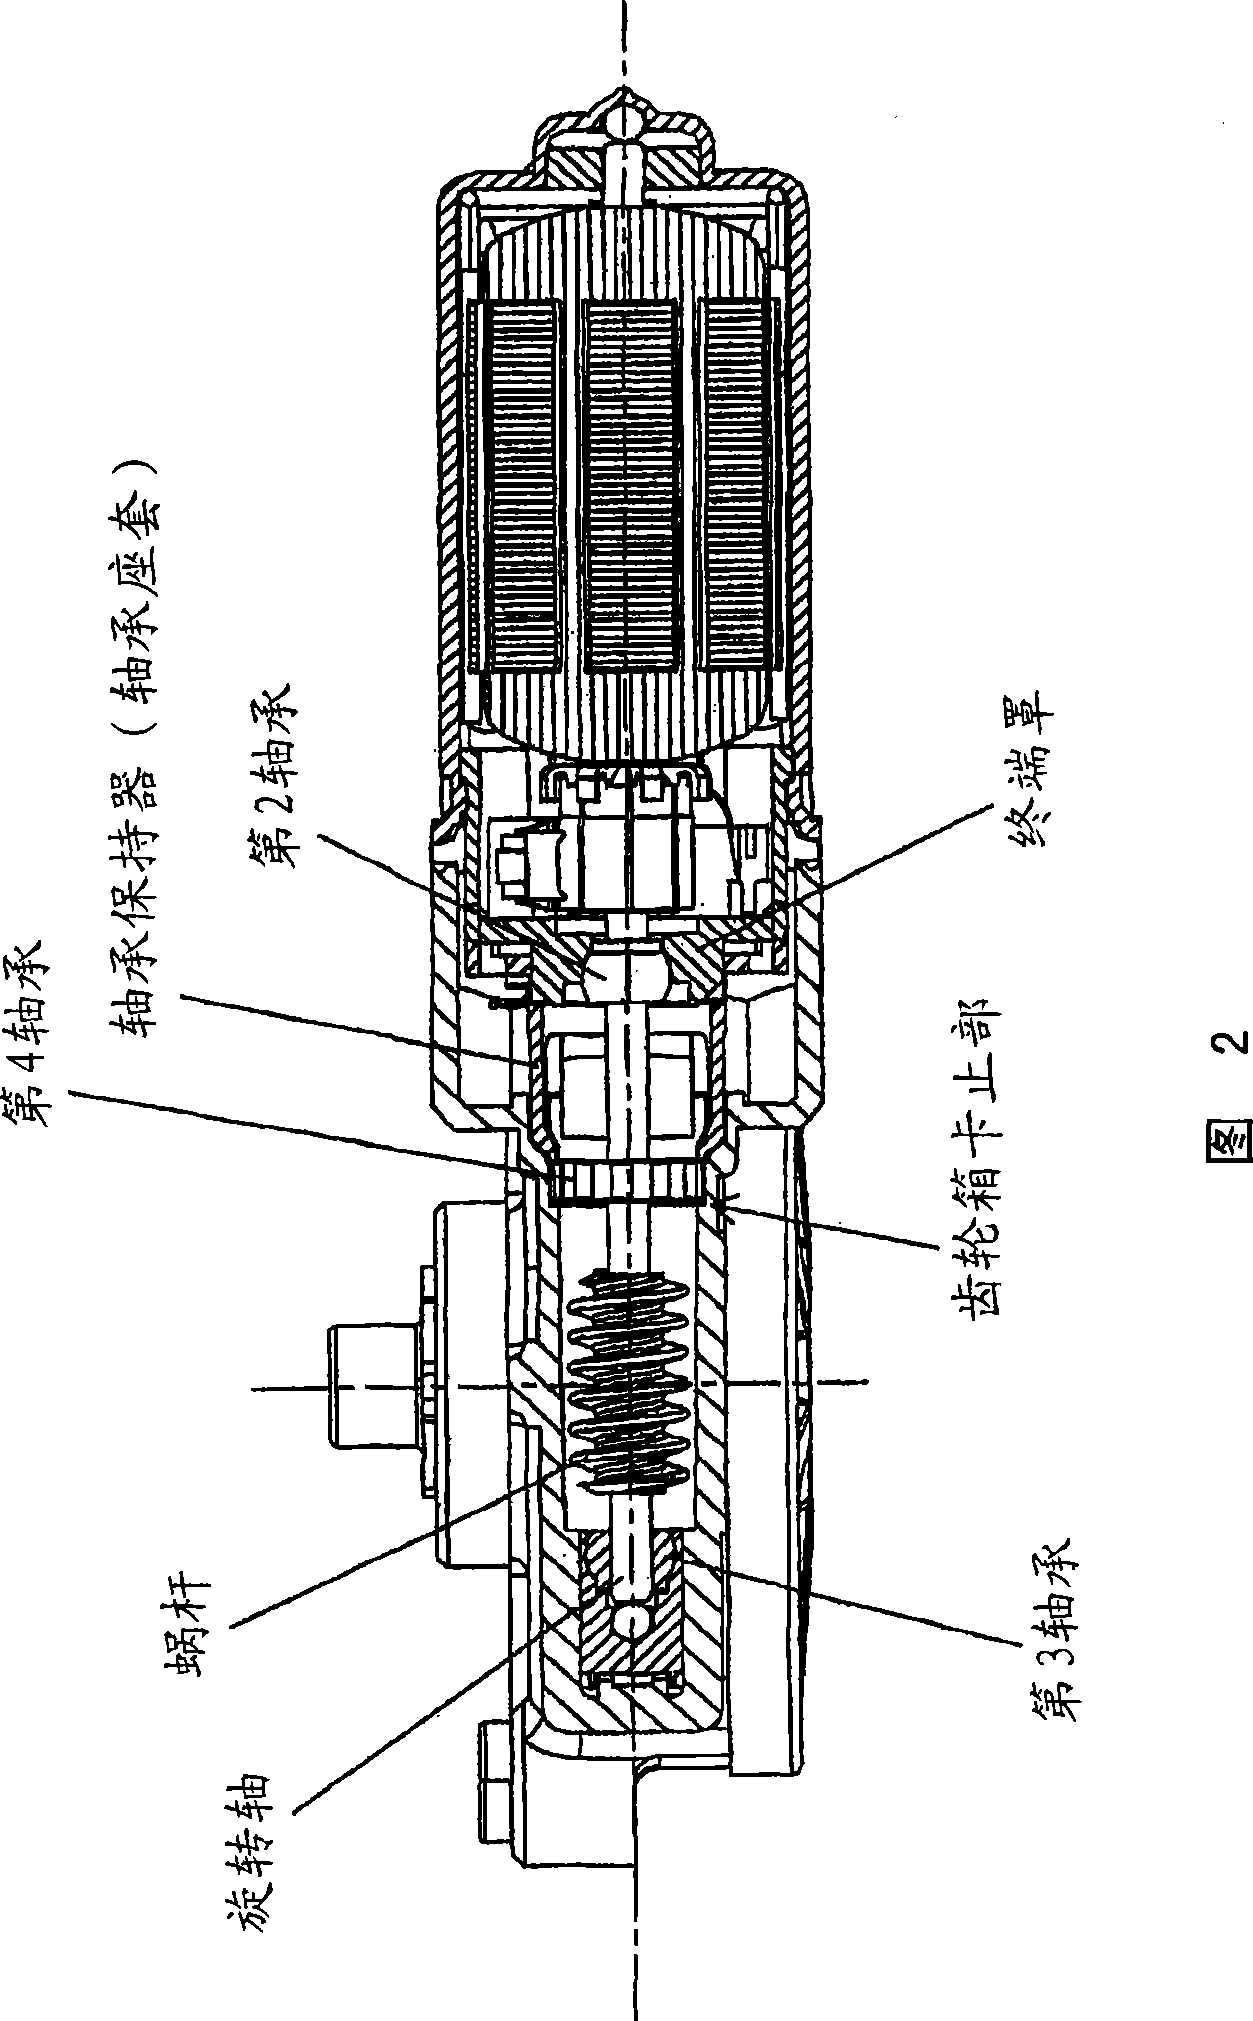 Motor equipped with reducer and method of manufacturing the same